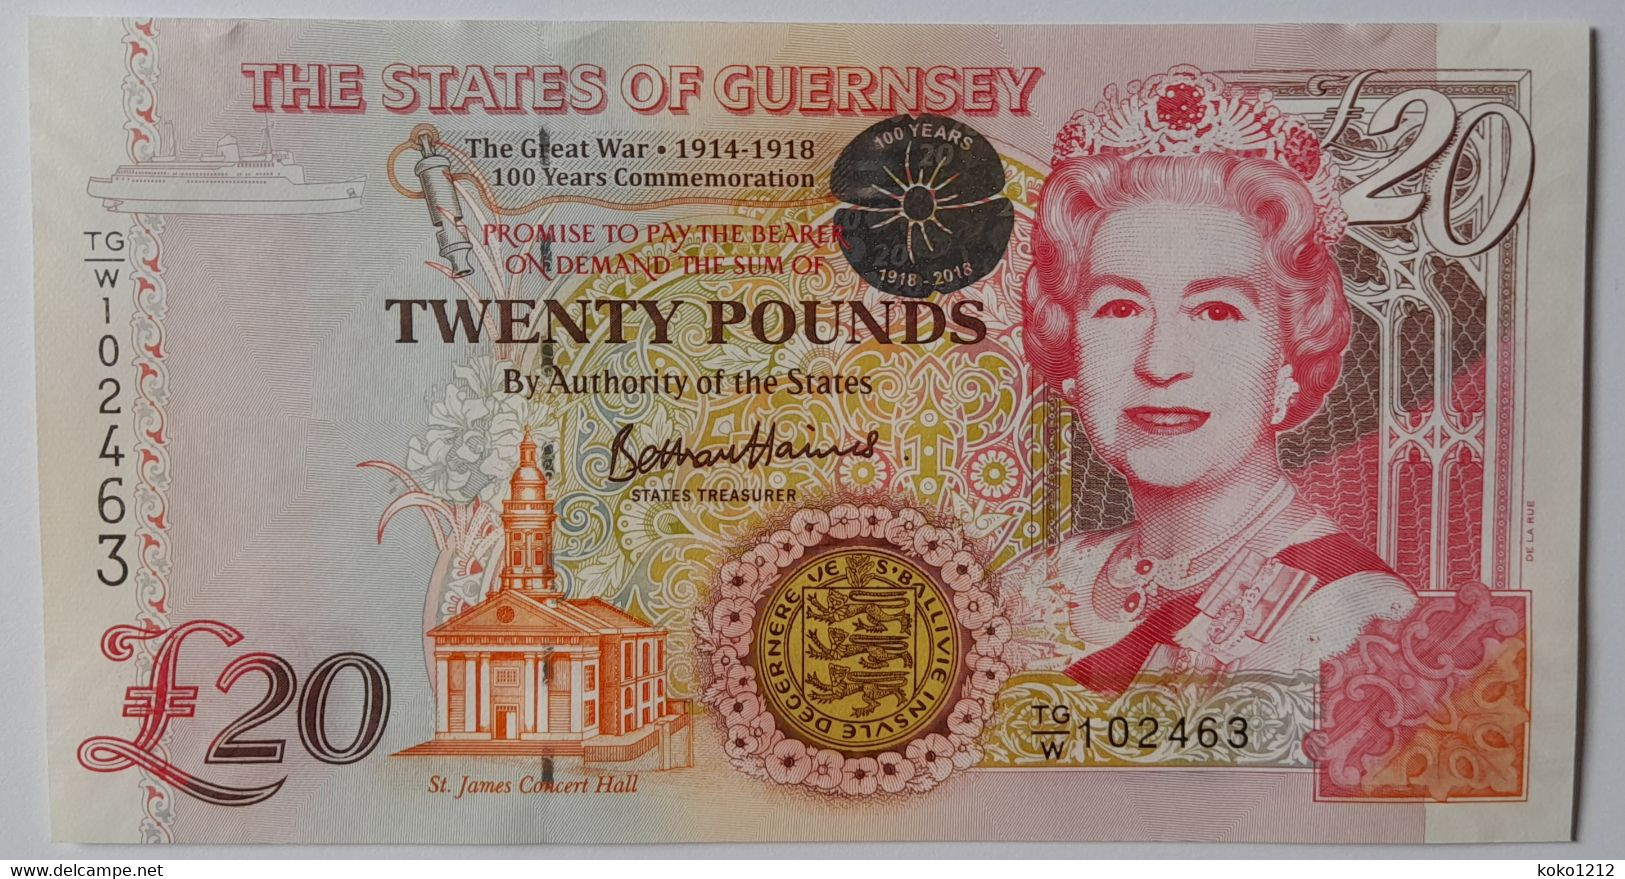 Guernsey 20 Pounds 2018 P63 Commemo WWI UNC - Guernsey